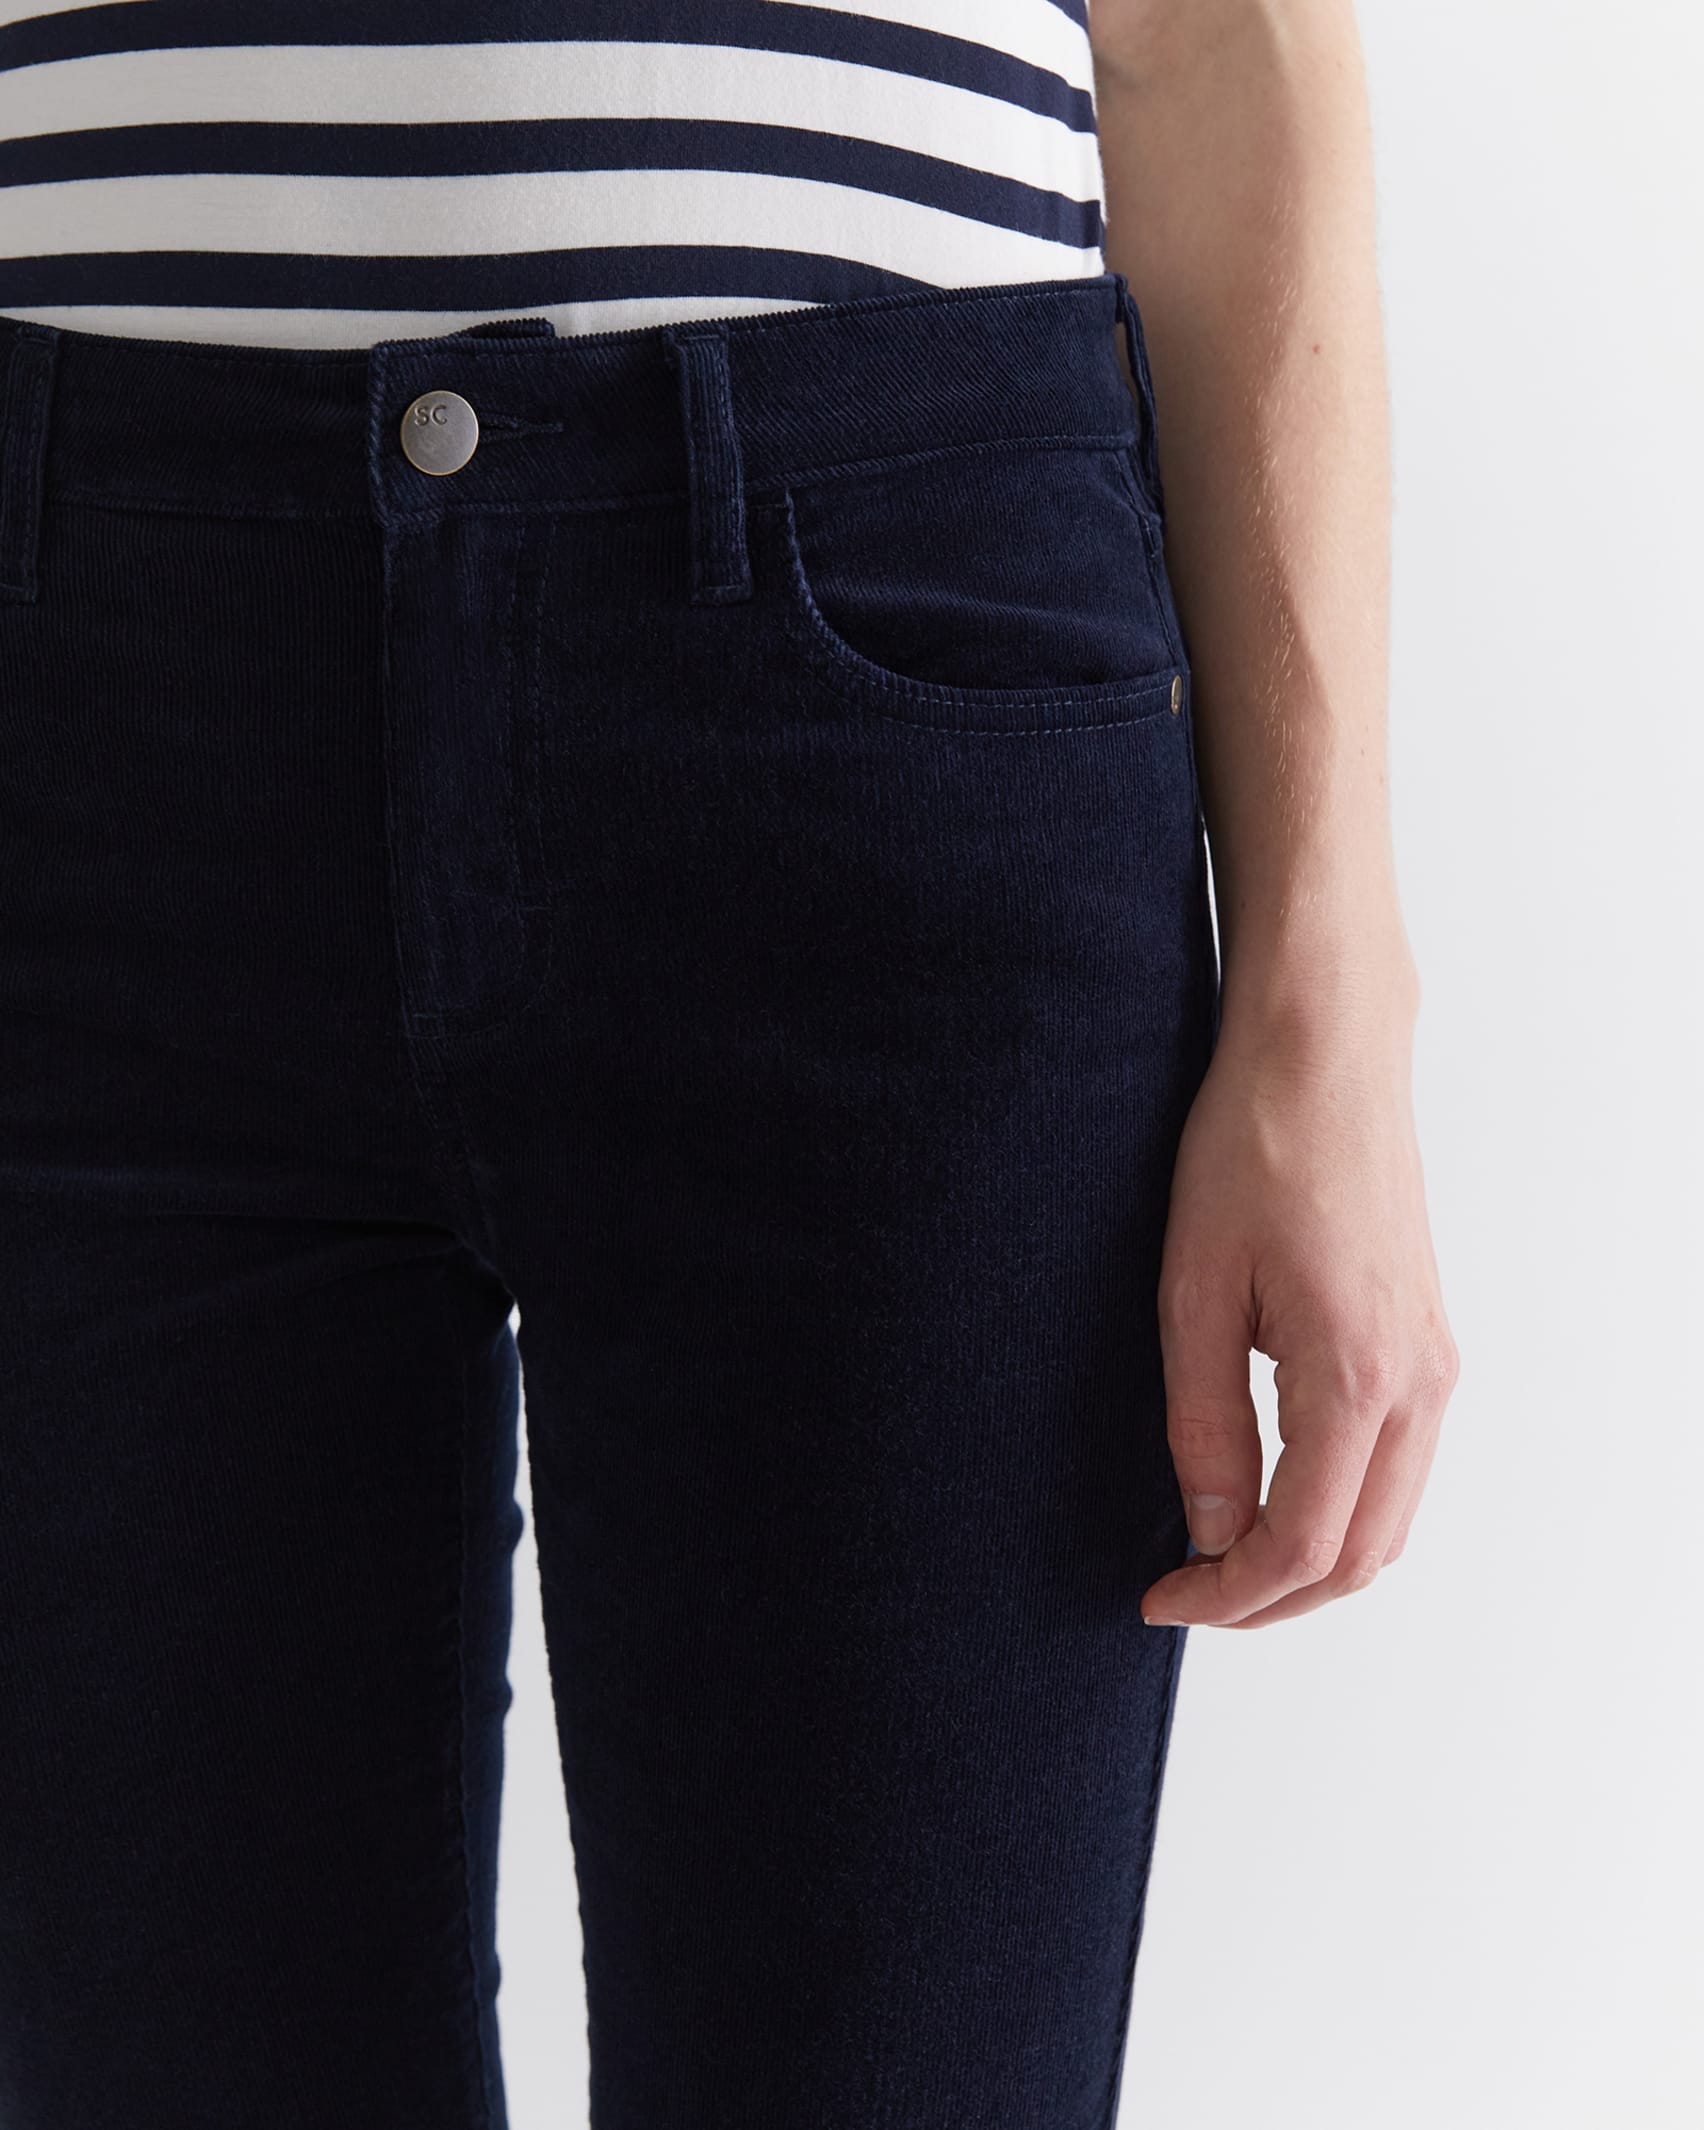 Cleo Cord Jean in NAVY